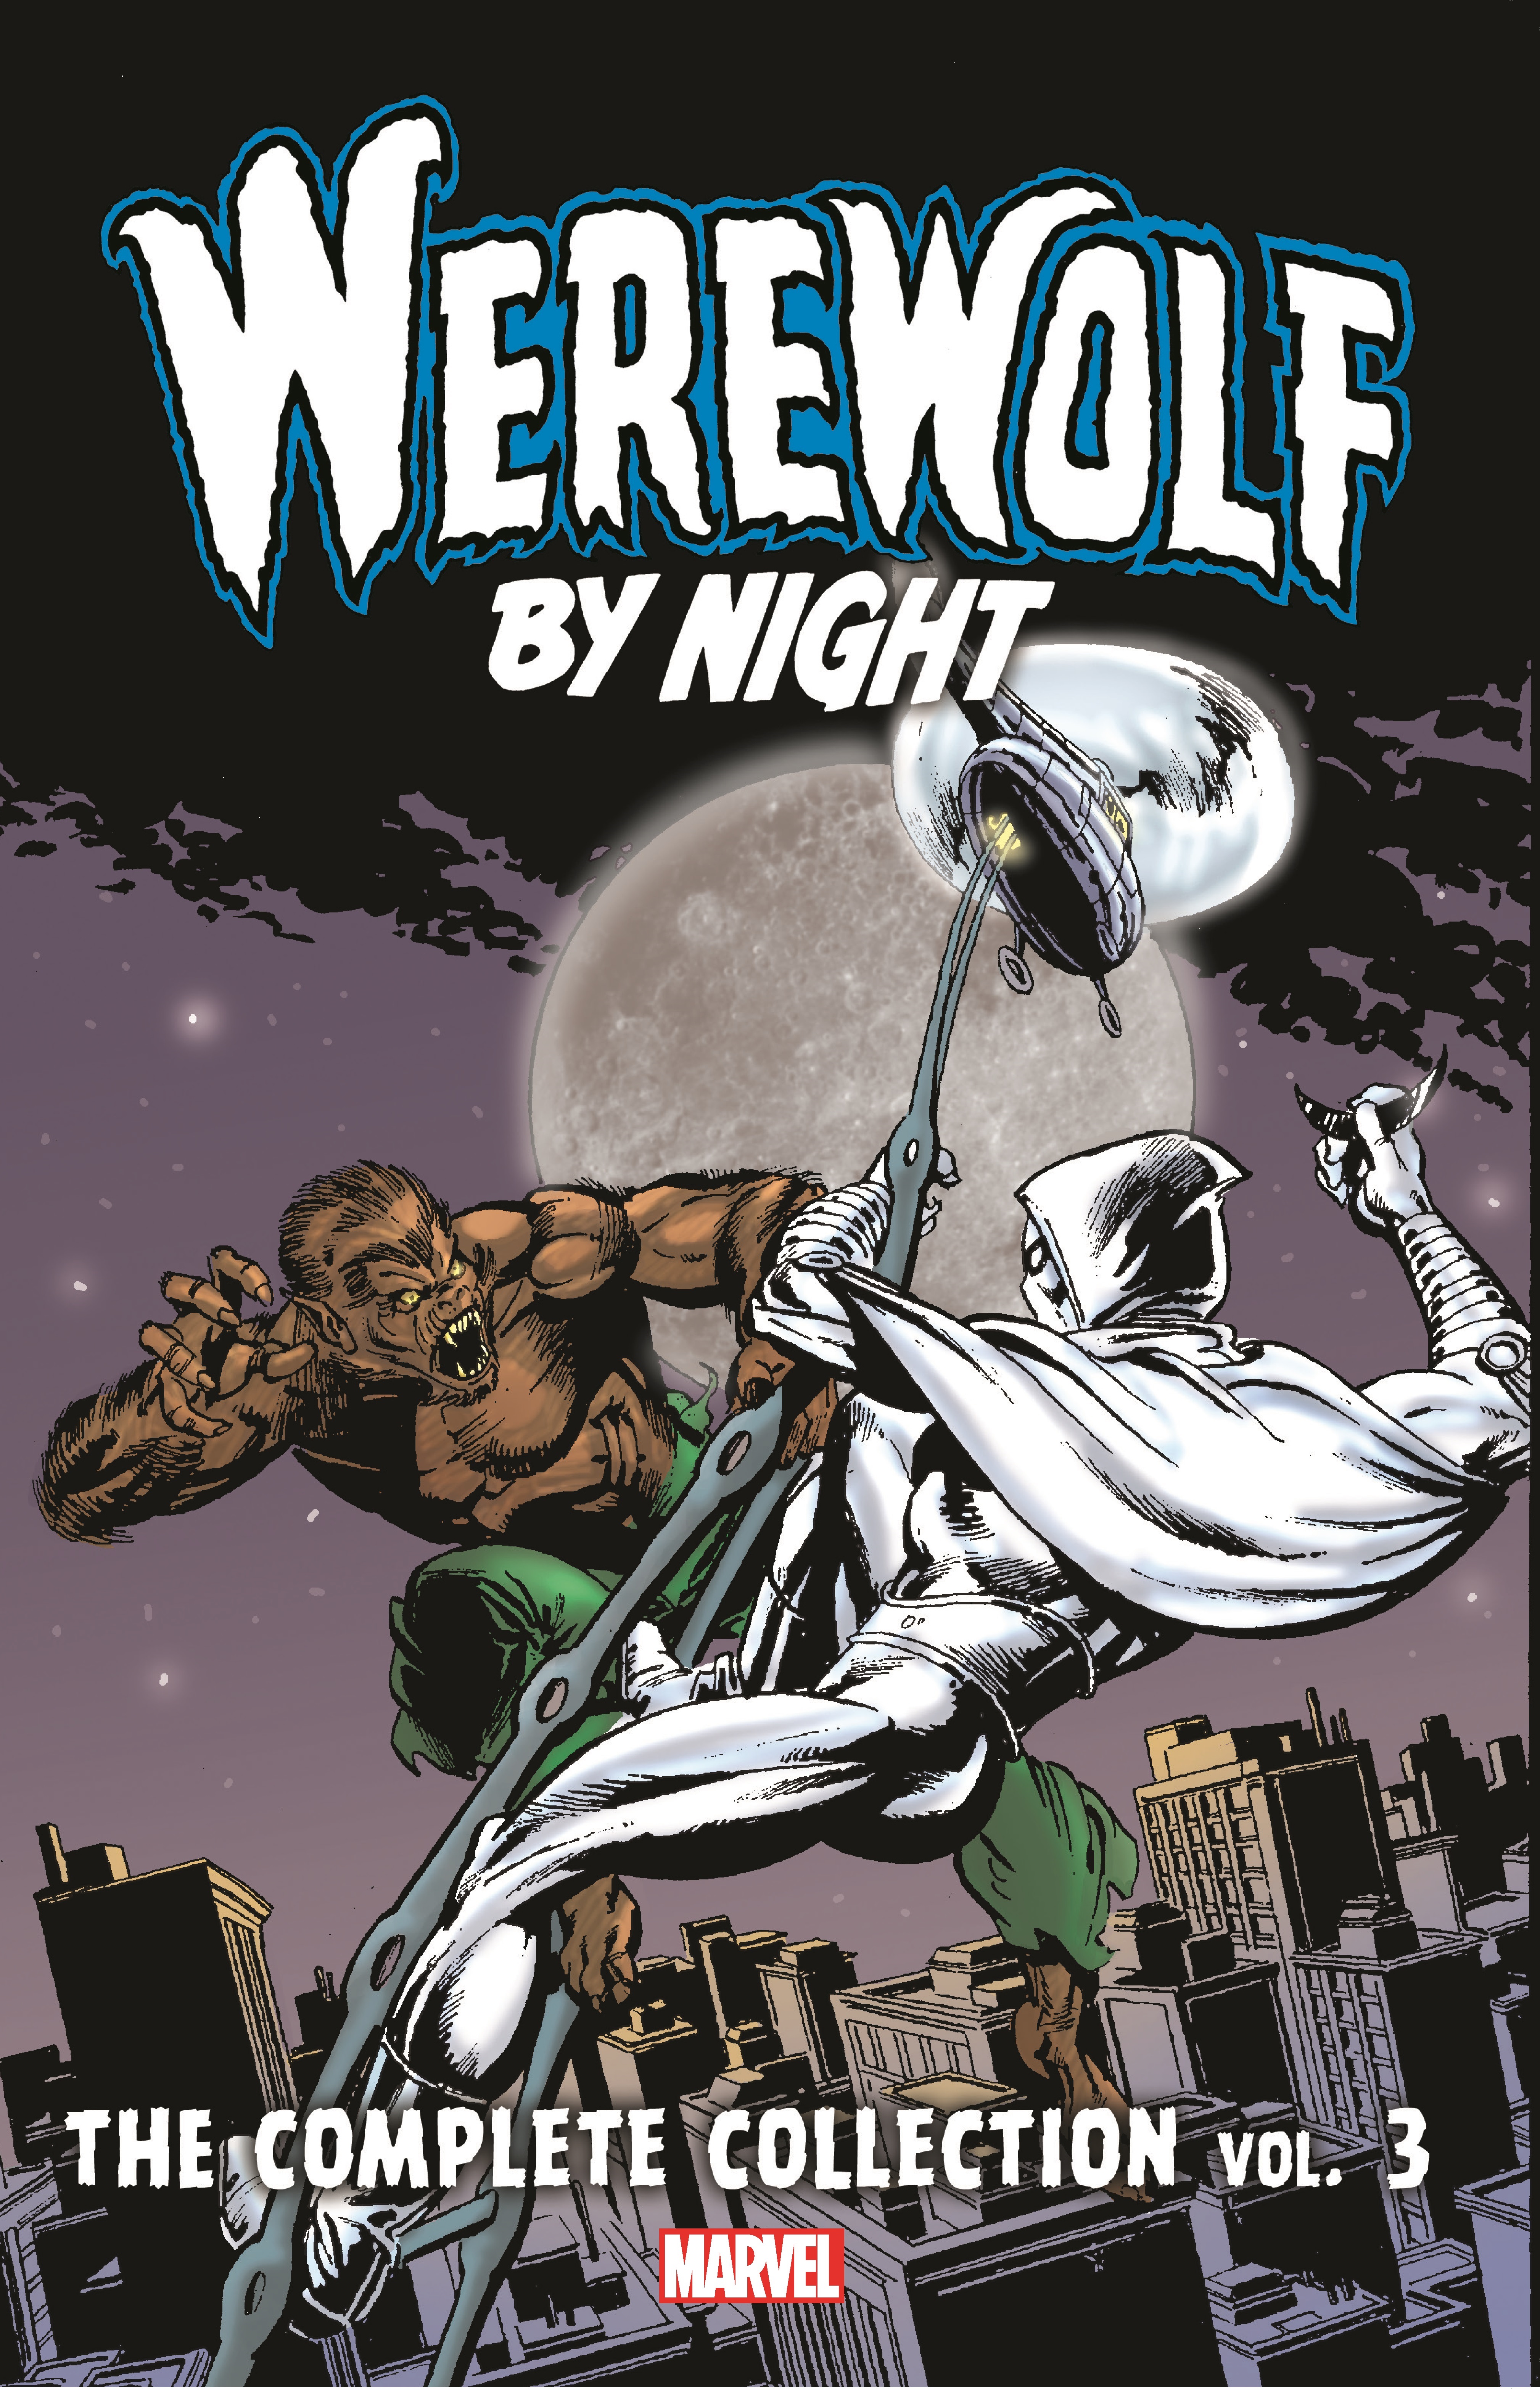 Werewolf by Night: The Complete Collection Vol. 3 (Trade Paperback)